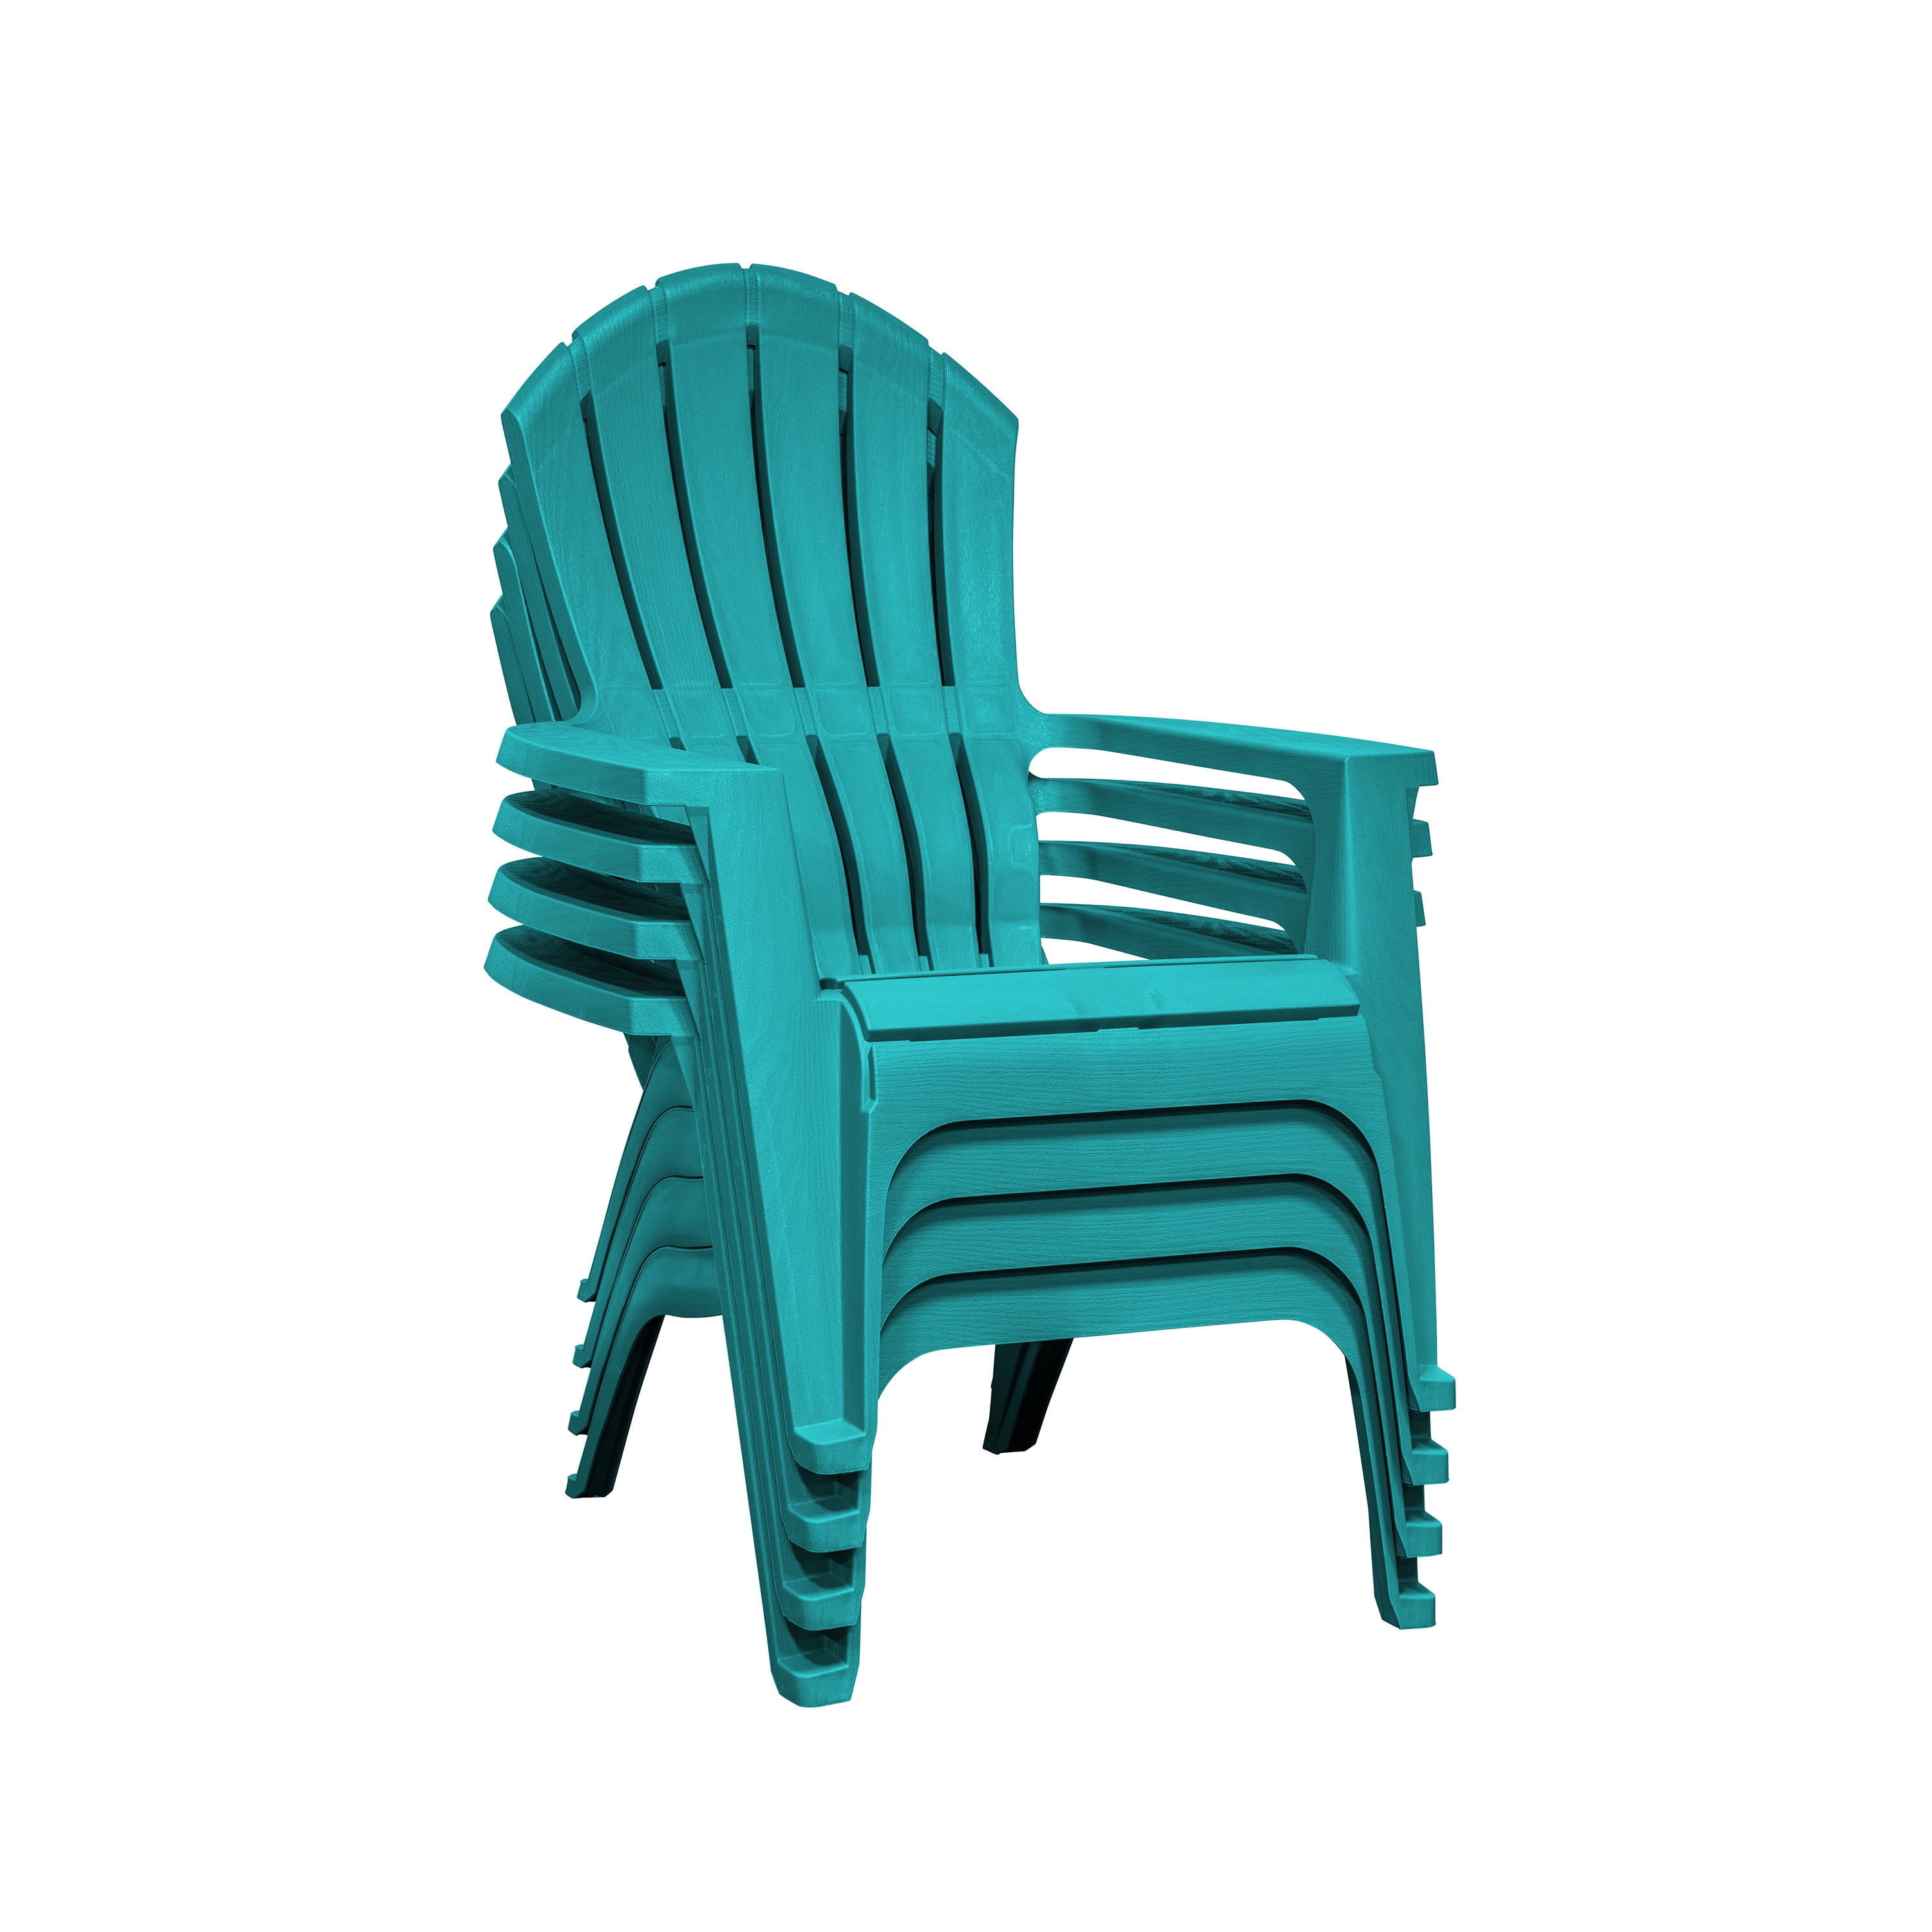 Big Easy Outdoor Resin Adirondack Chair, Stackable Plastic Lawn Chairs Menards